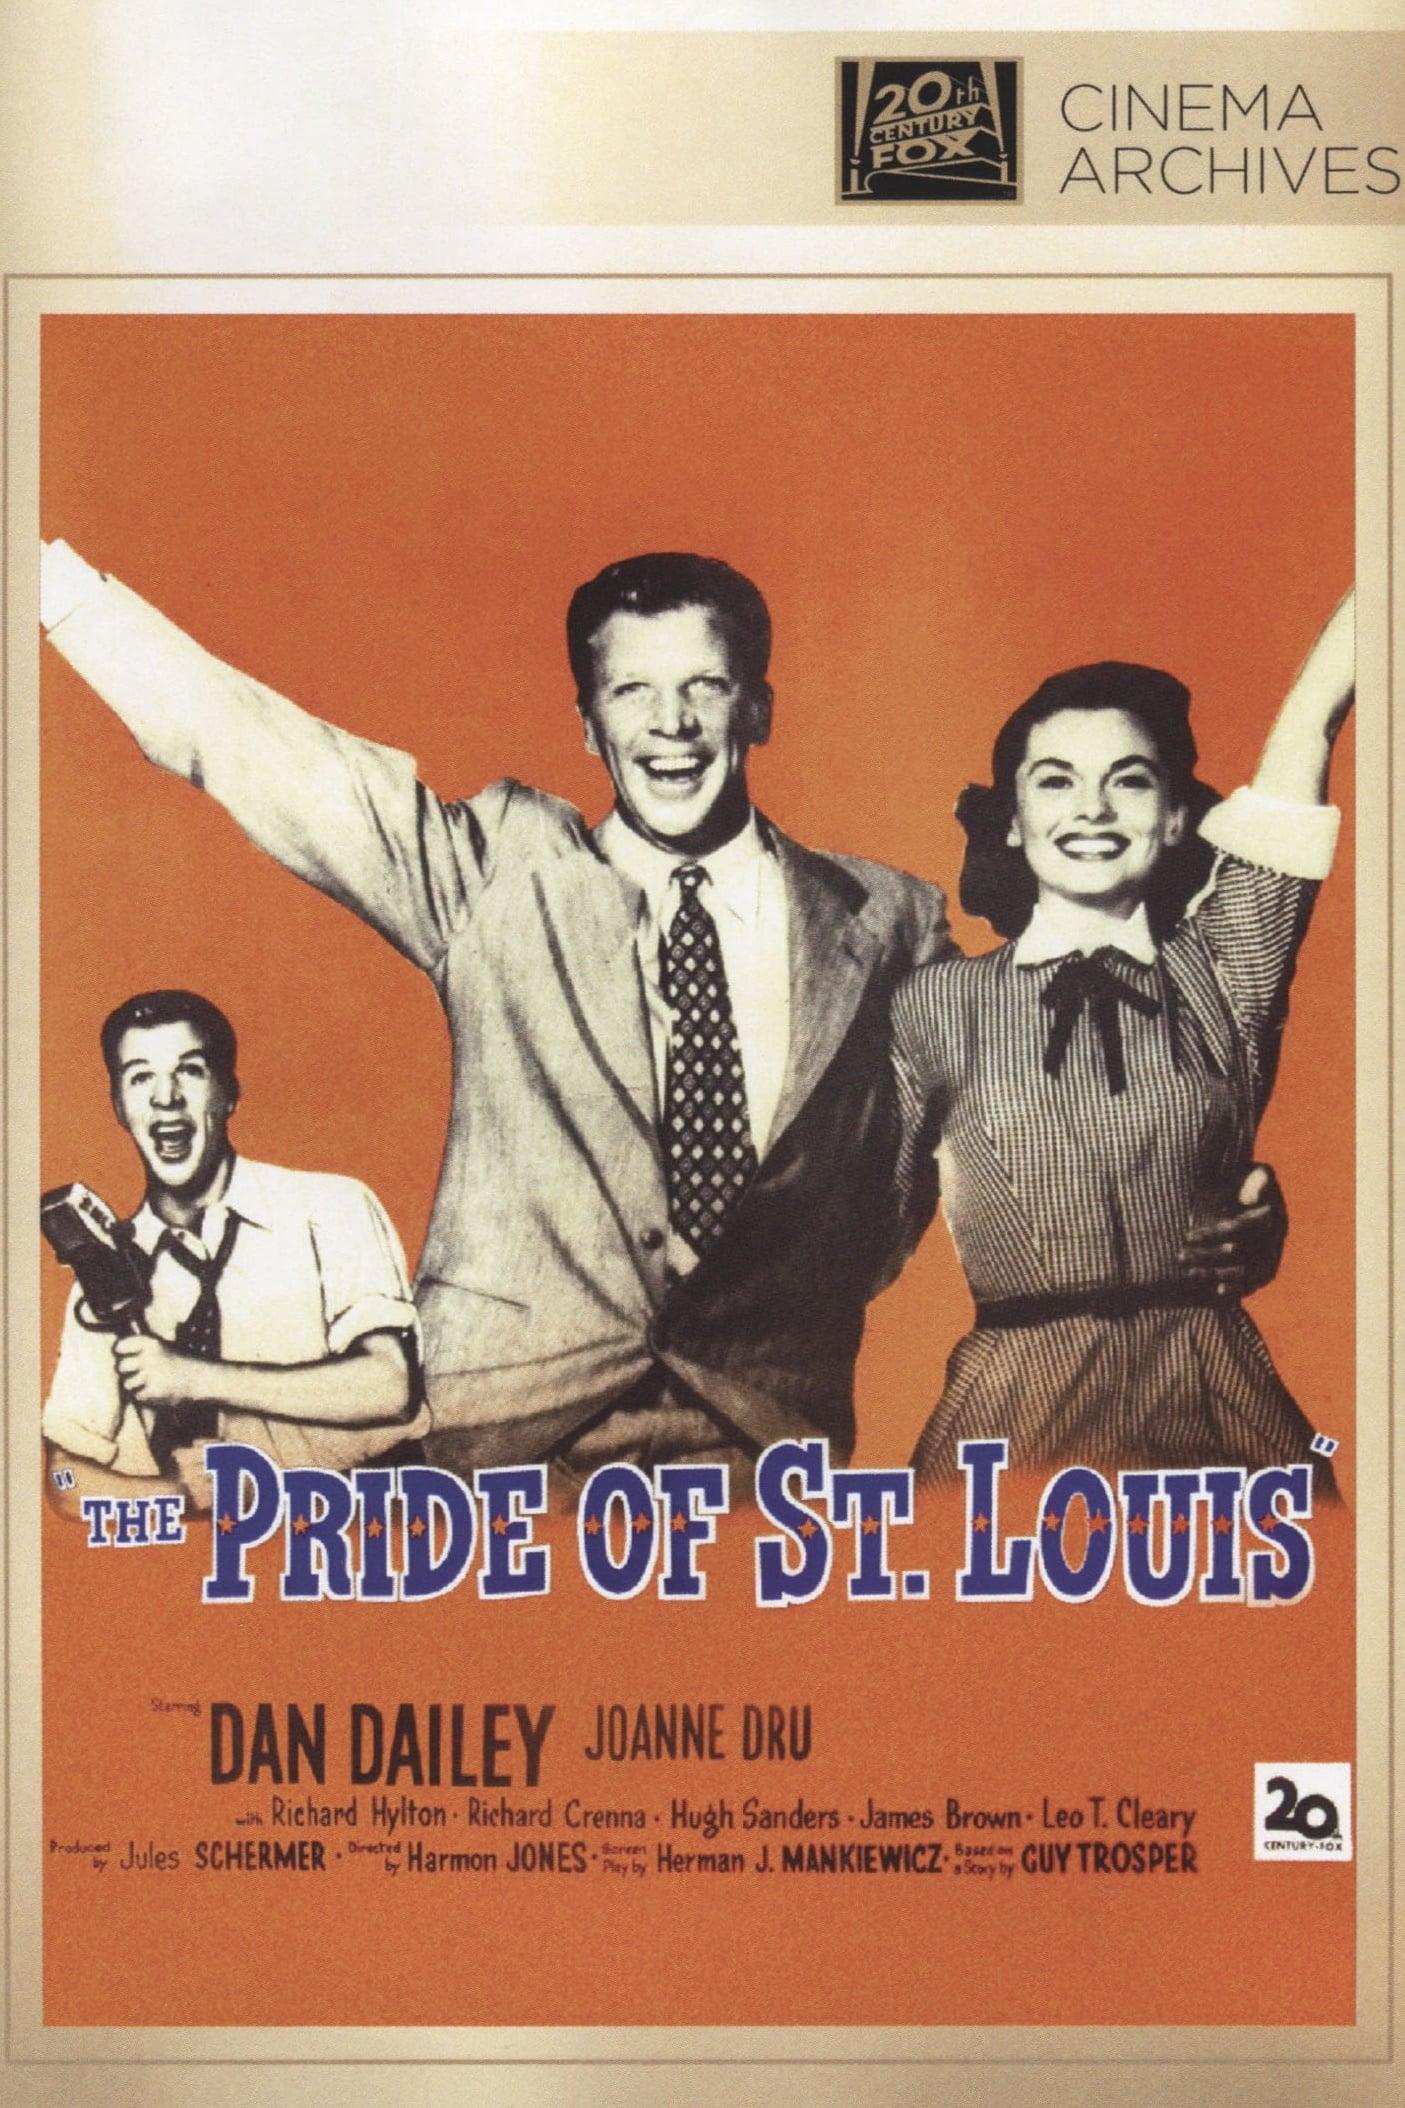 The Pride of St. Louis poster